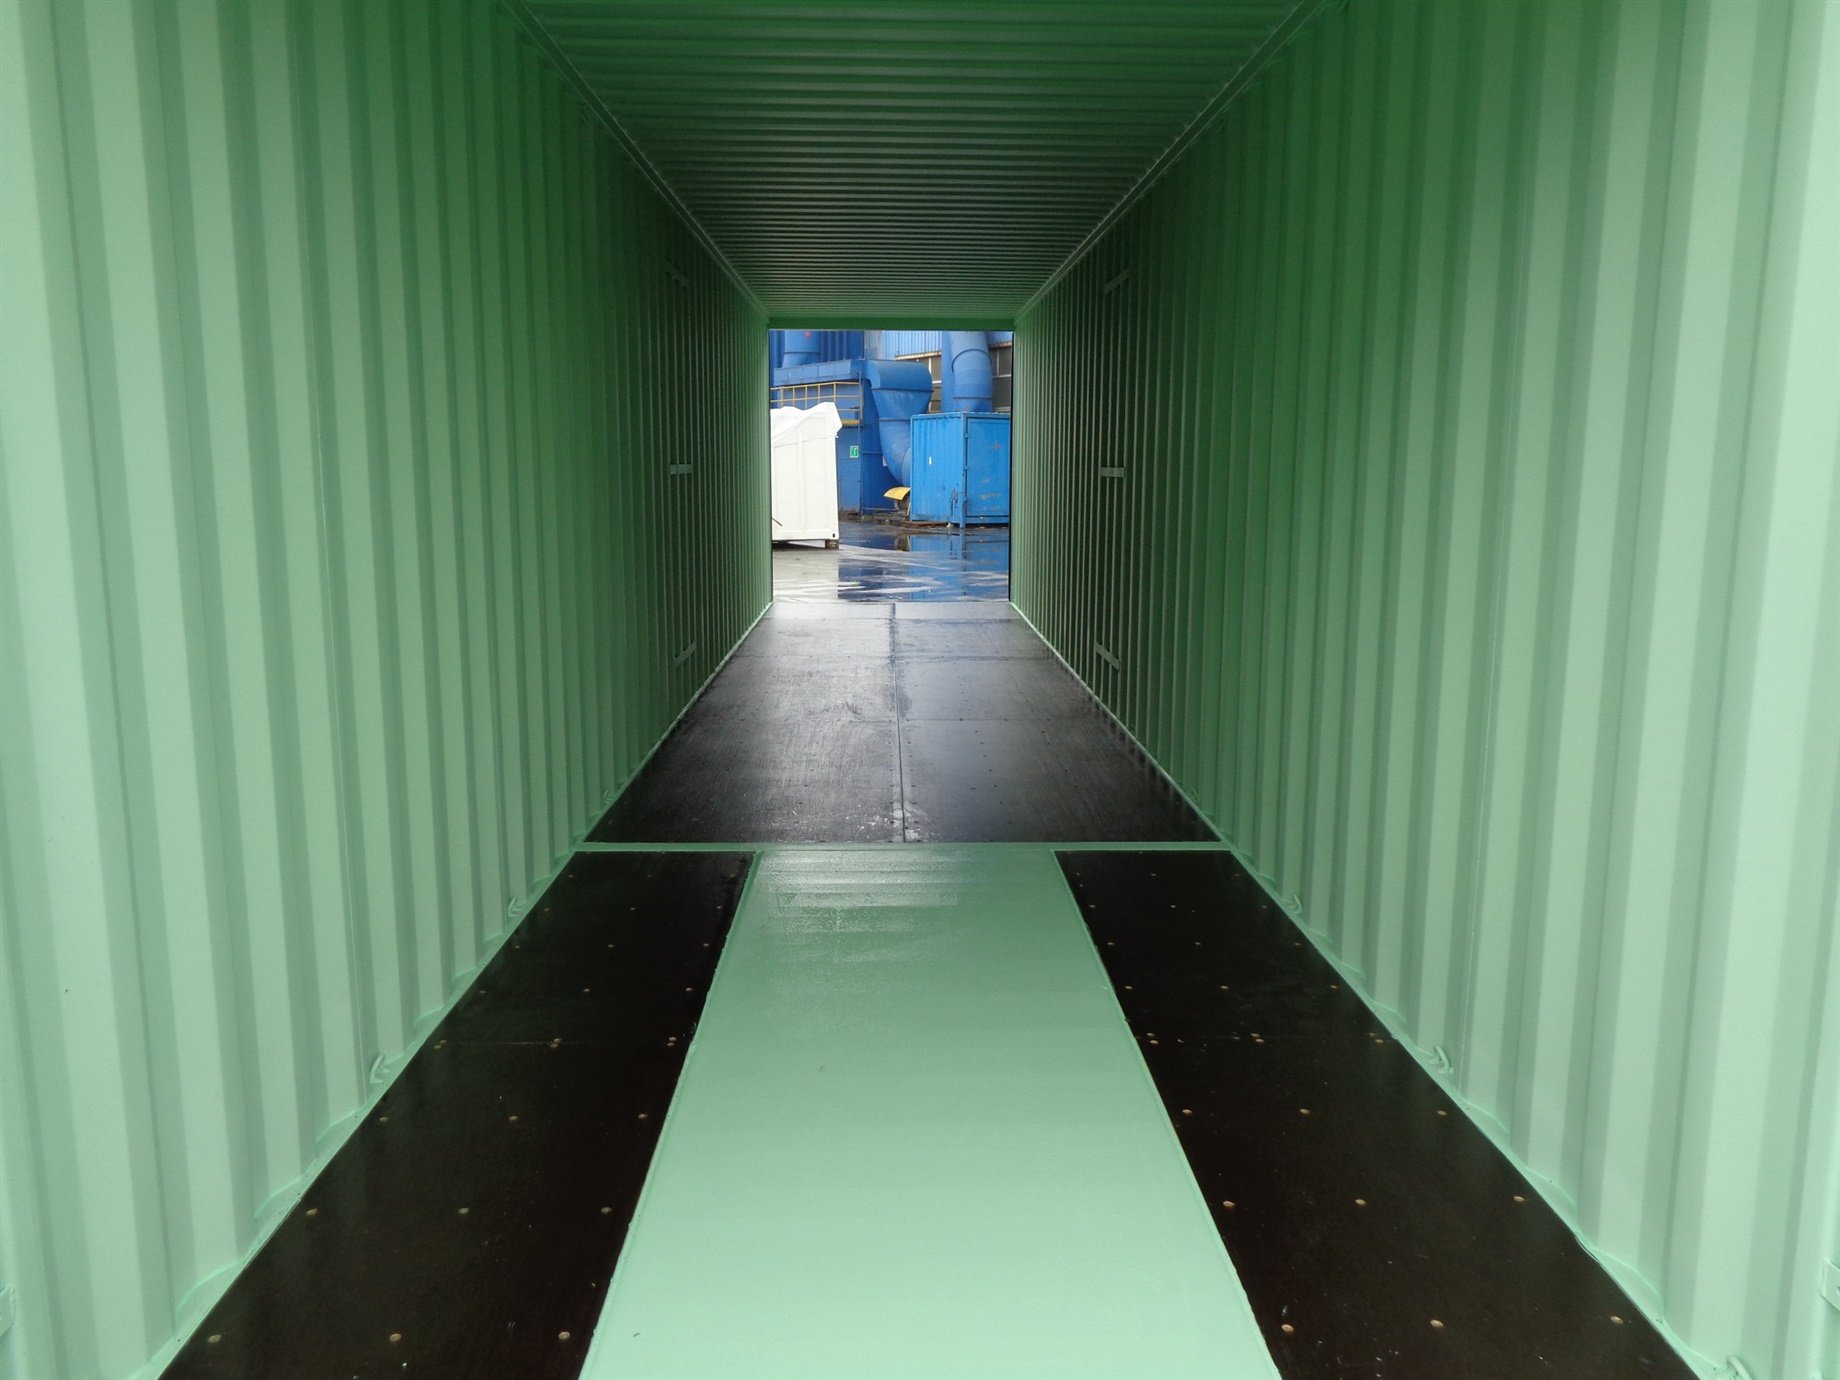 Container with doors on each end open 40